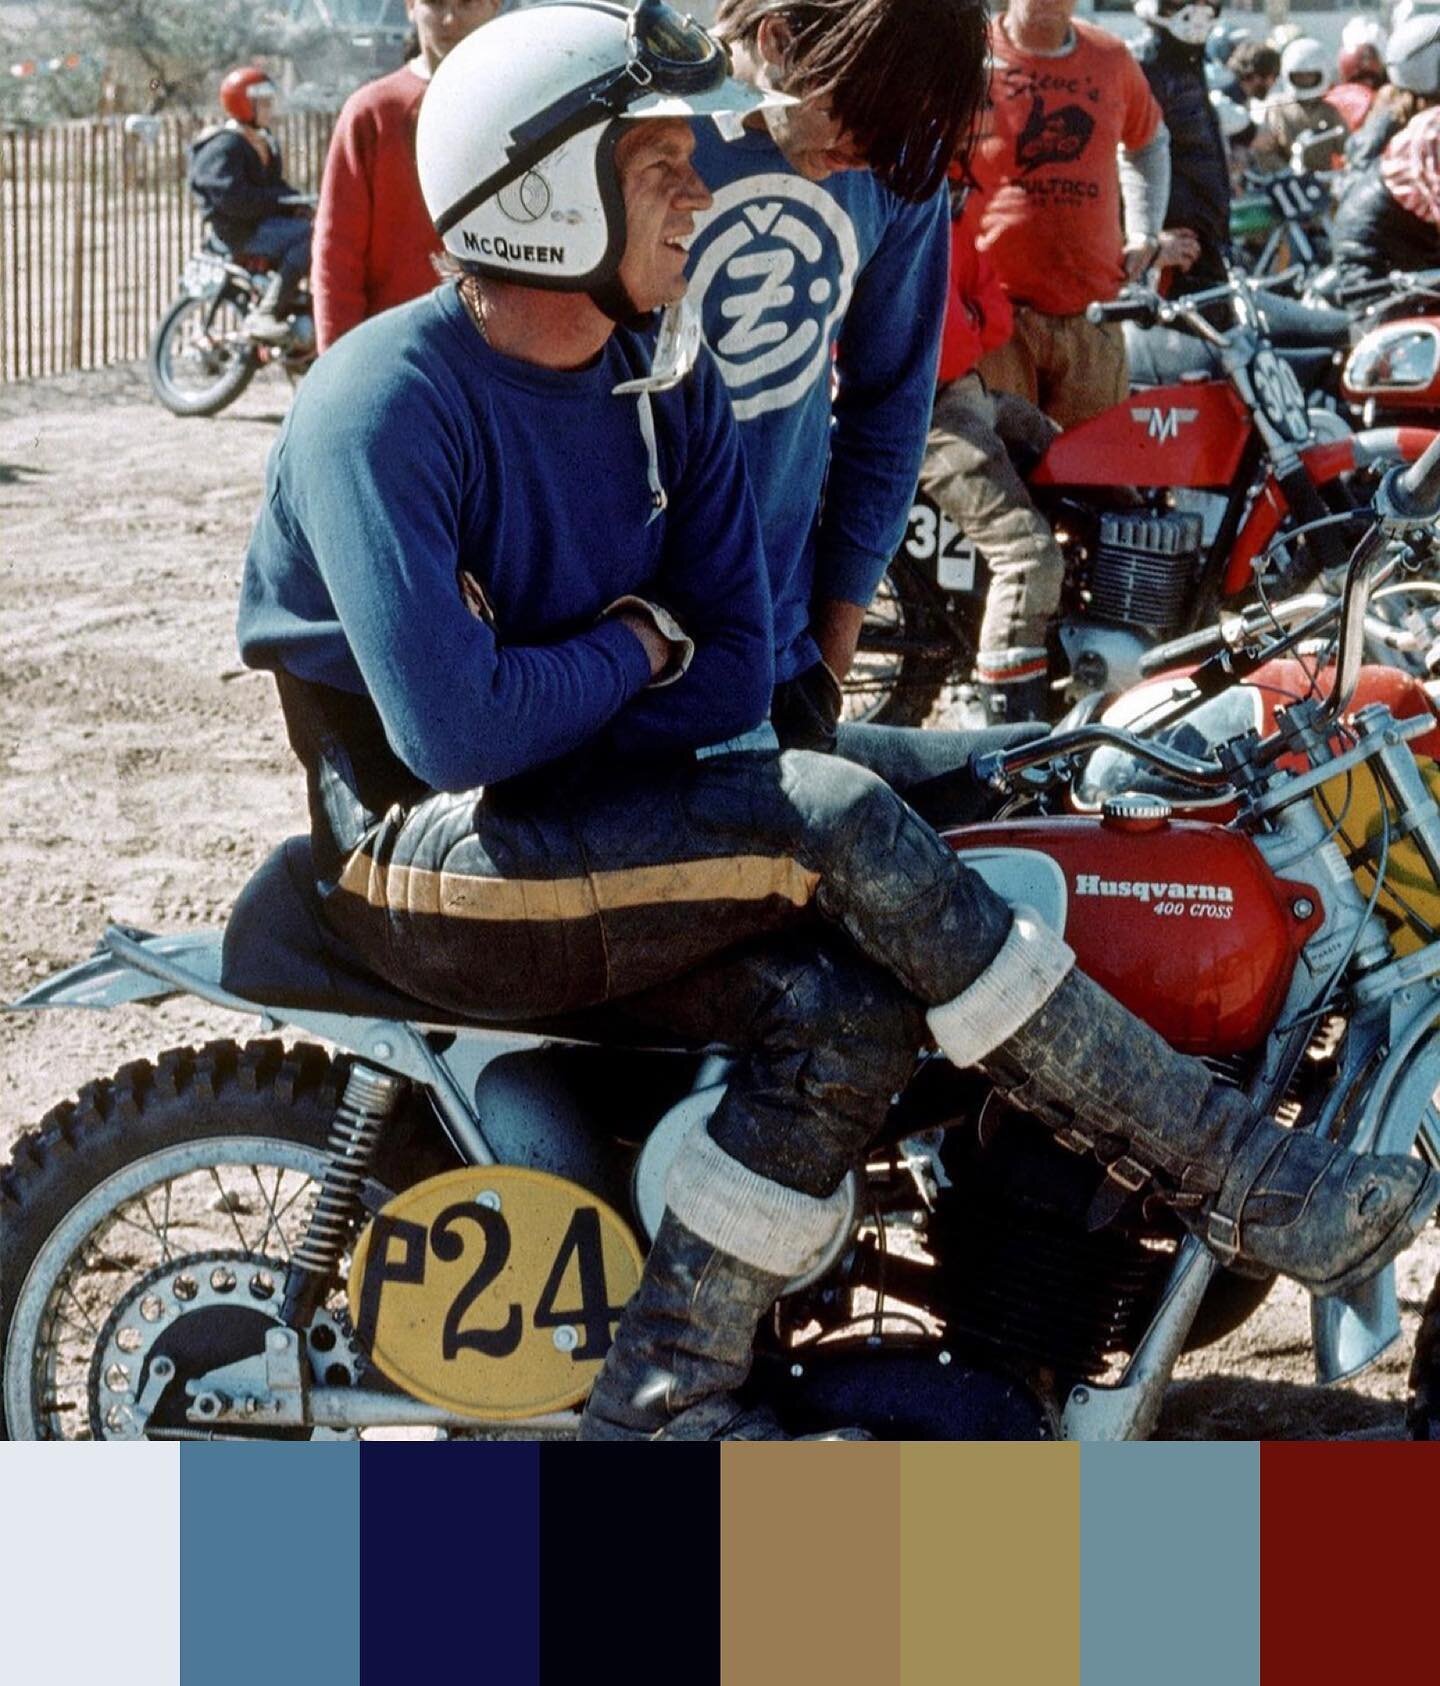 &ldquo;Racing is life. Everything else is just waiting.&rdquo; - Steve McQueen 

Happy Sunday everyone. Get out there.

#colorpalette #artdirection #raceday  #stevemcqueen #vintagecolor